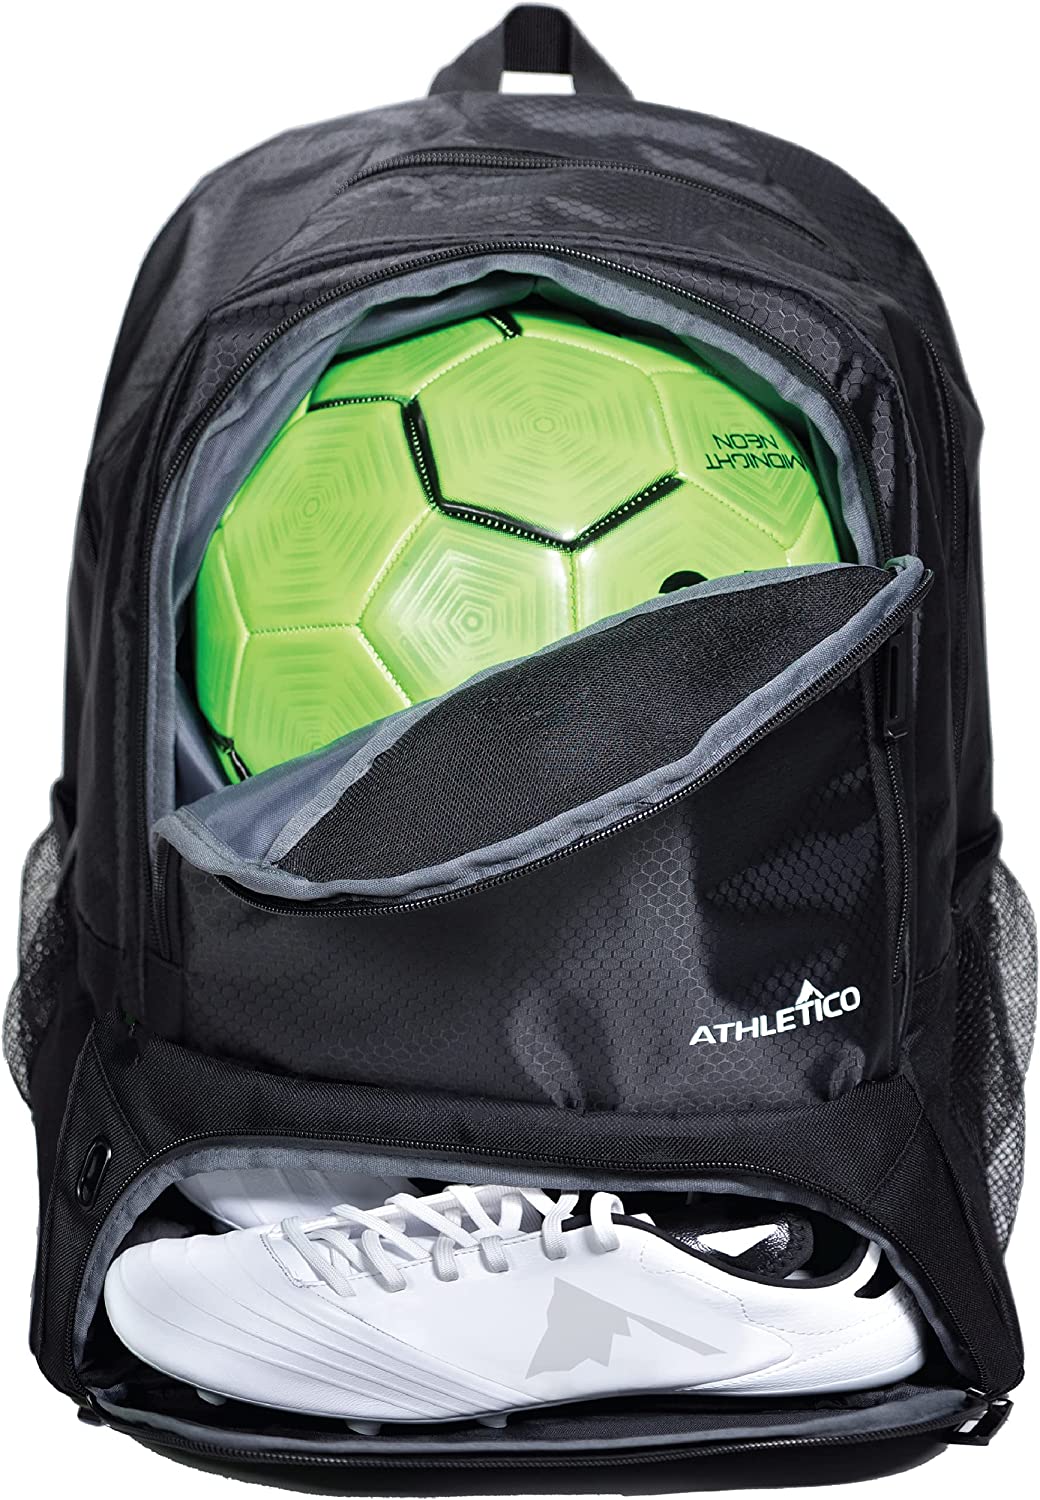  6. Athletico Basketball Backpack - Kid Basketball Bag - Separate Compartments 